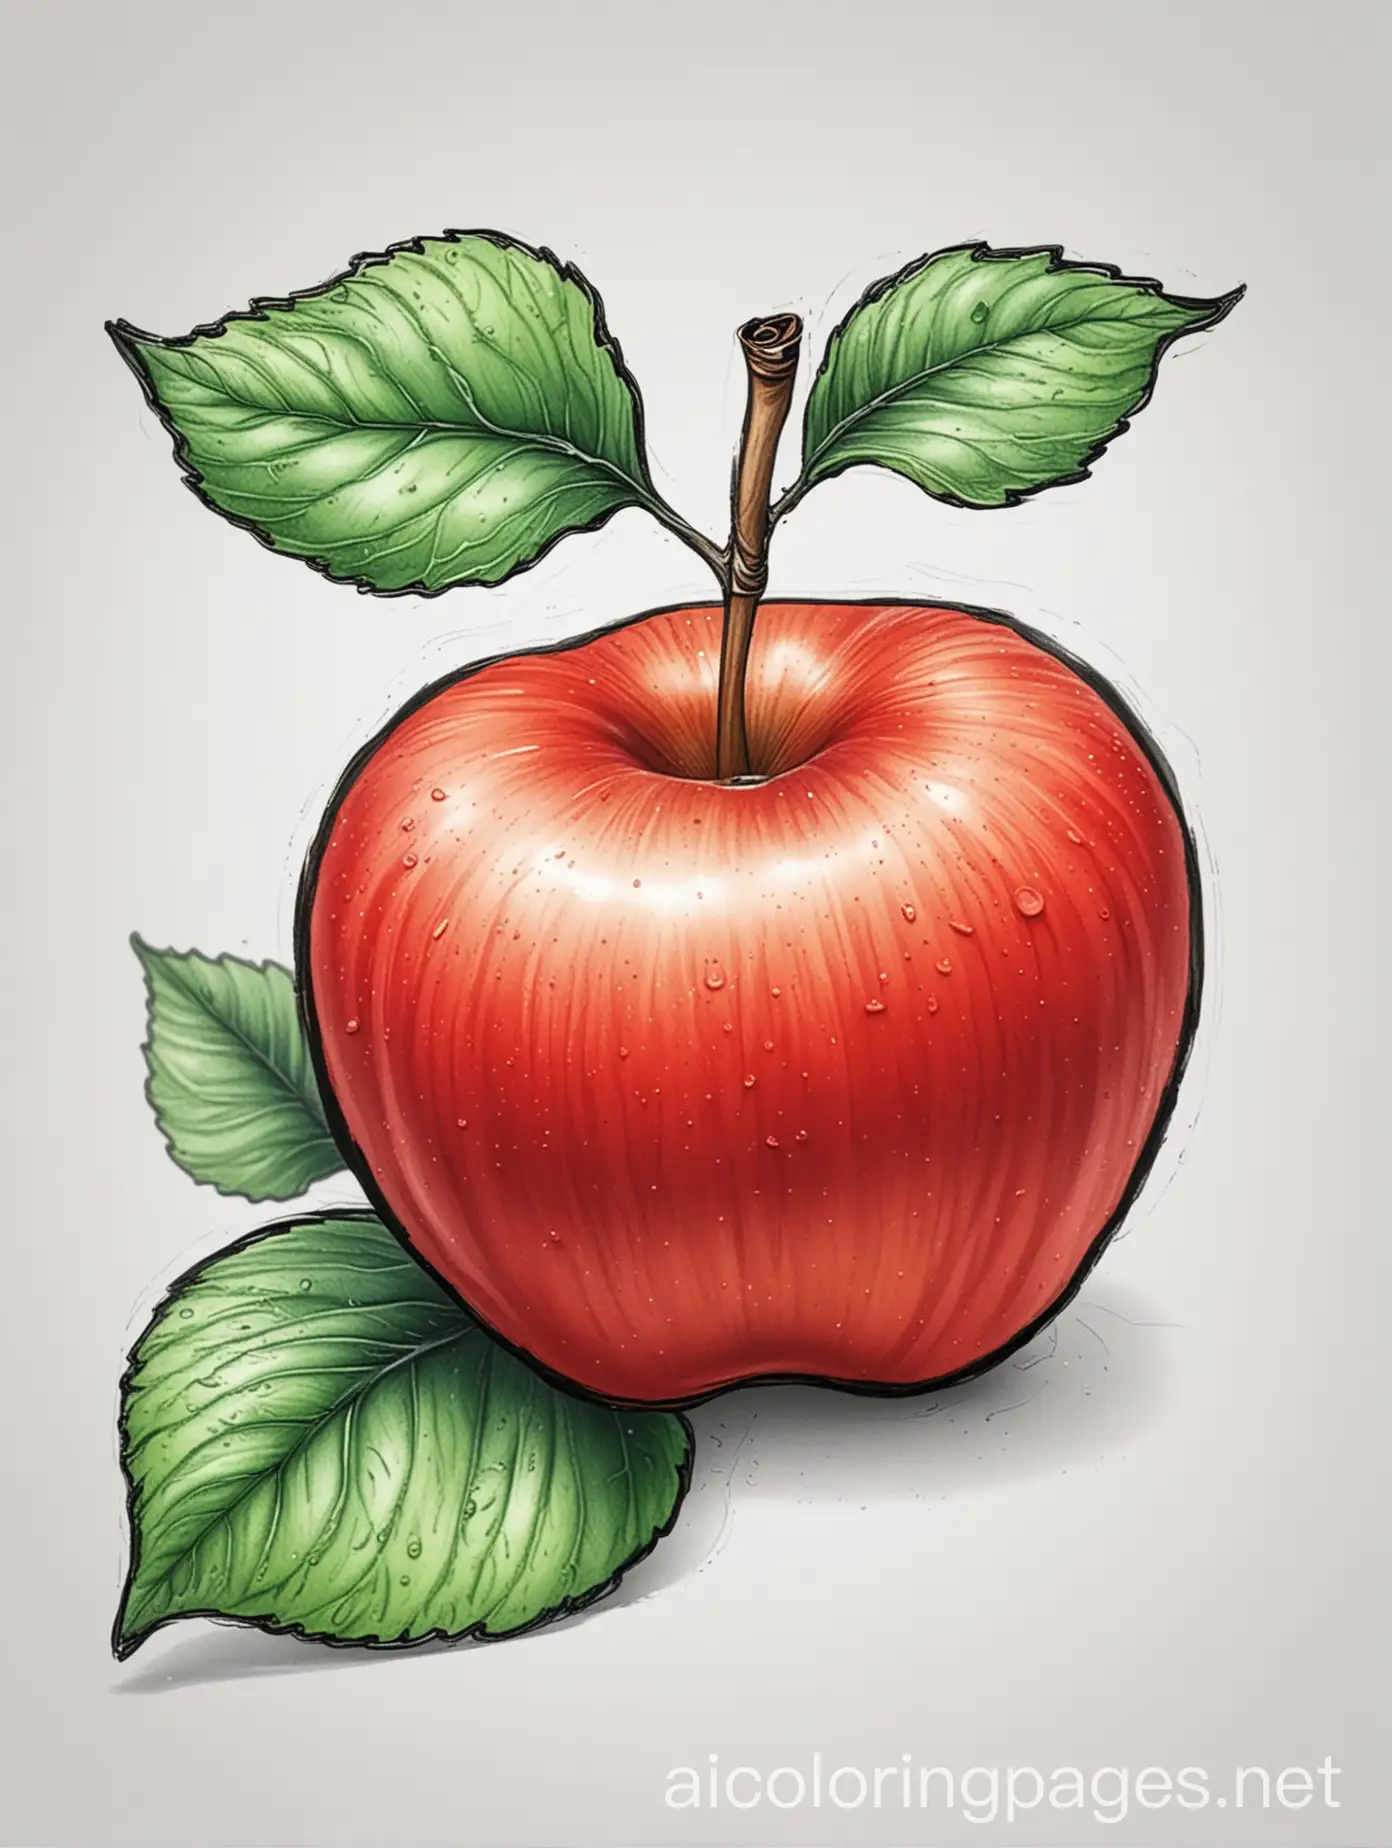 A bright red apple with a green leaf on a white background., Coloring Page, black and white, line art, white background, Simplicity, Ample White Space. The background of the coloring page is plain white to make it easy for young children to color within the lines. The outlines of all the subjects are easy to distinguish, making it simple for kids to color without too much difficulty